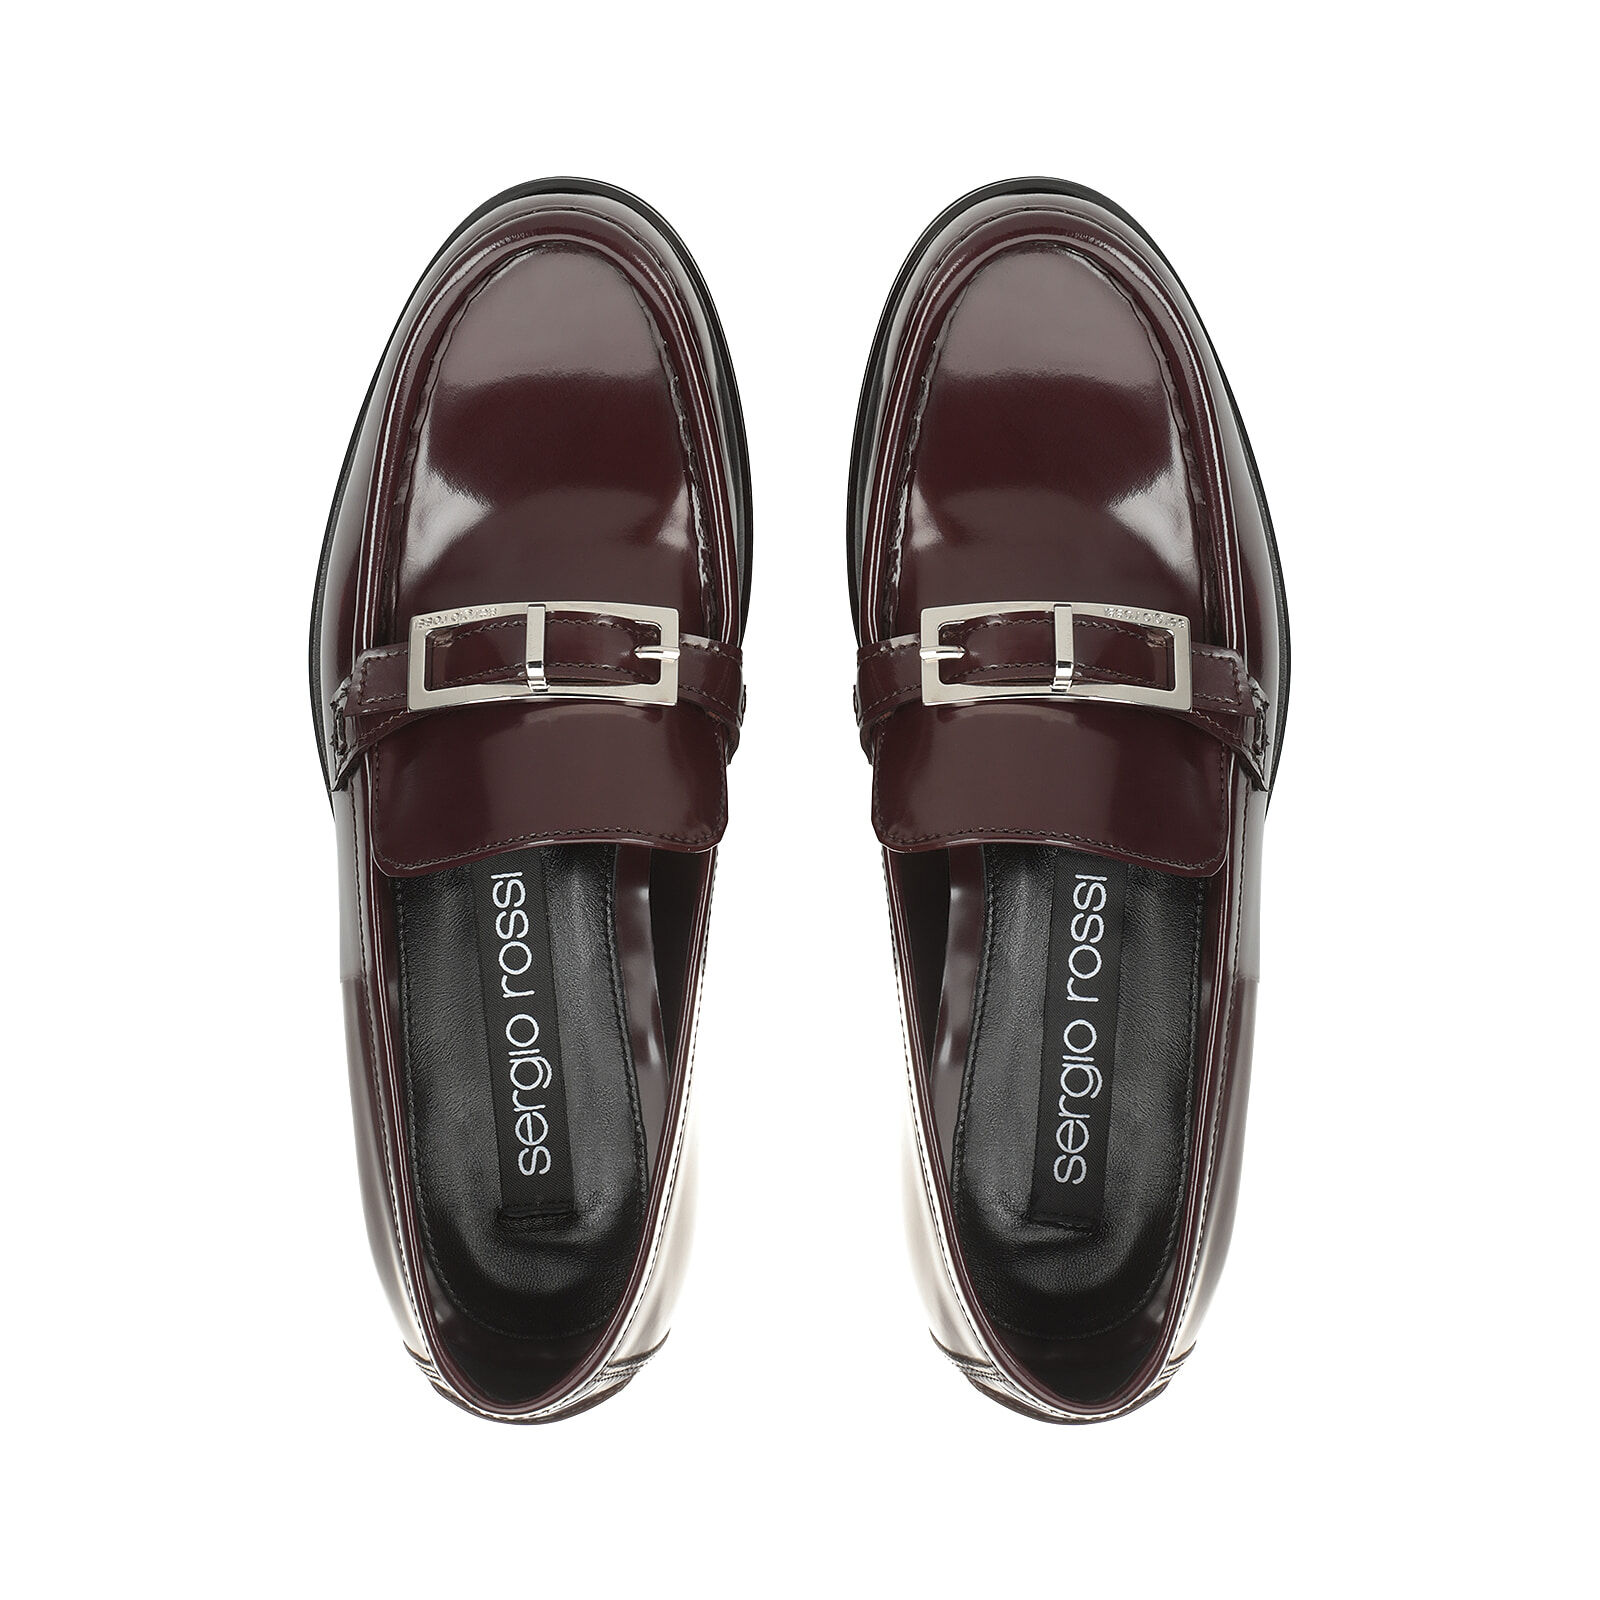 sr Nora - Loafers Wine, 3